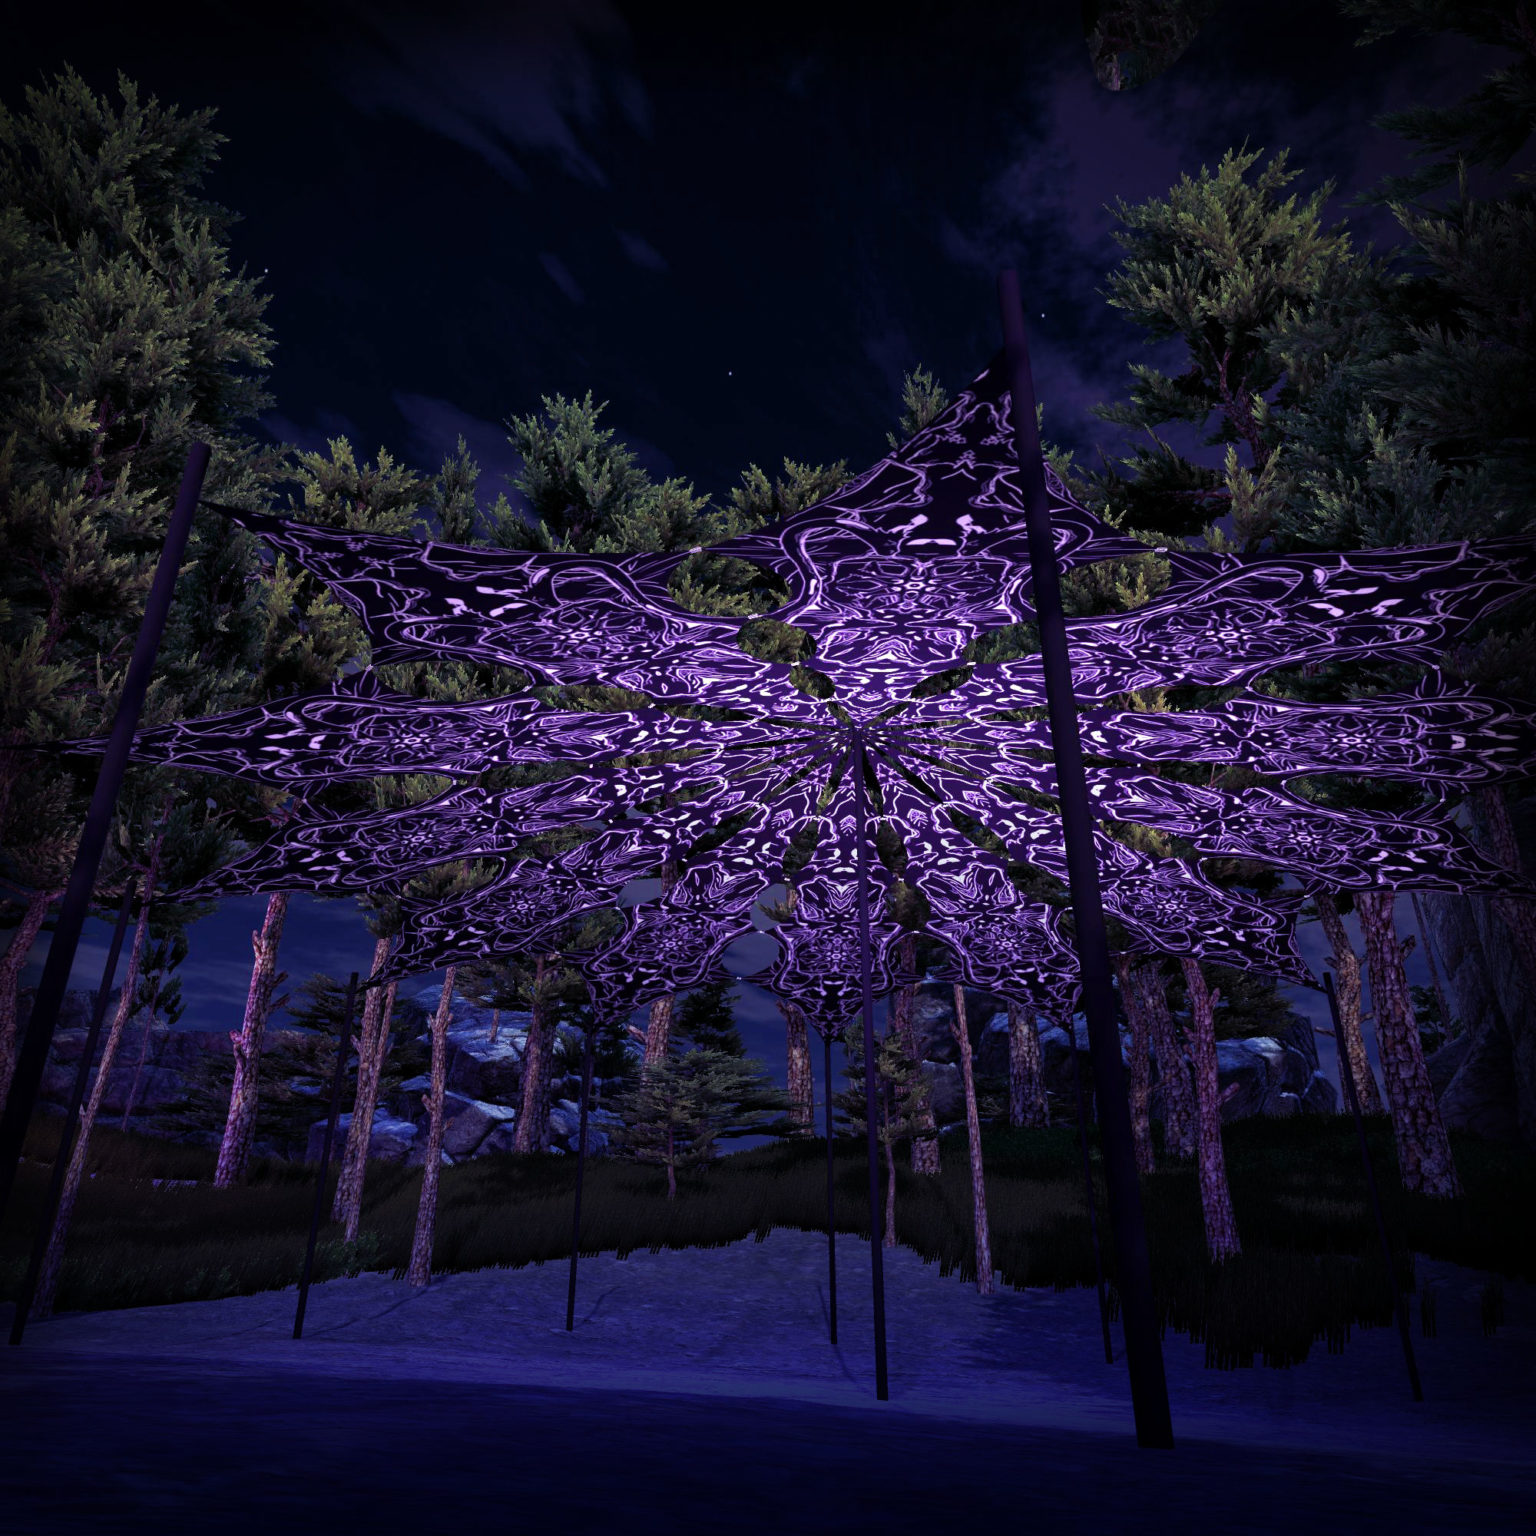 Winter Tale - Black Dragons - Psychedelic Black&White Canopy - 12 petals set - 3D-Preview